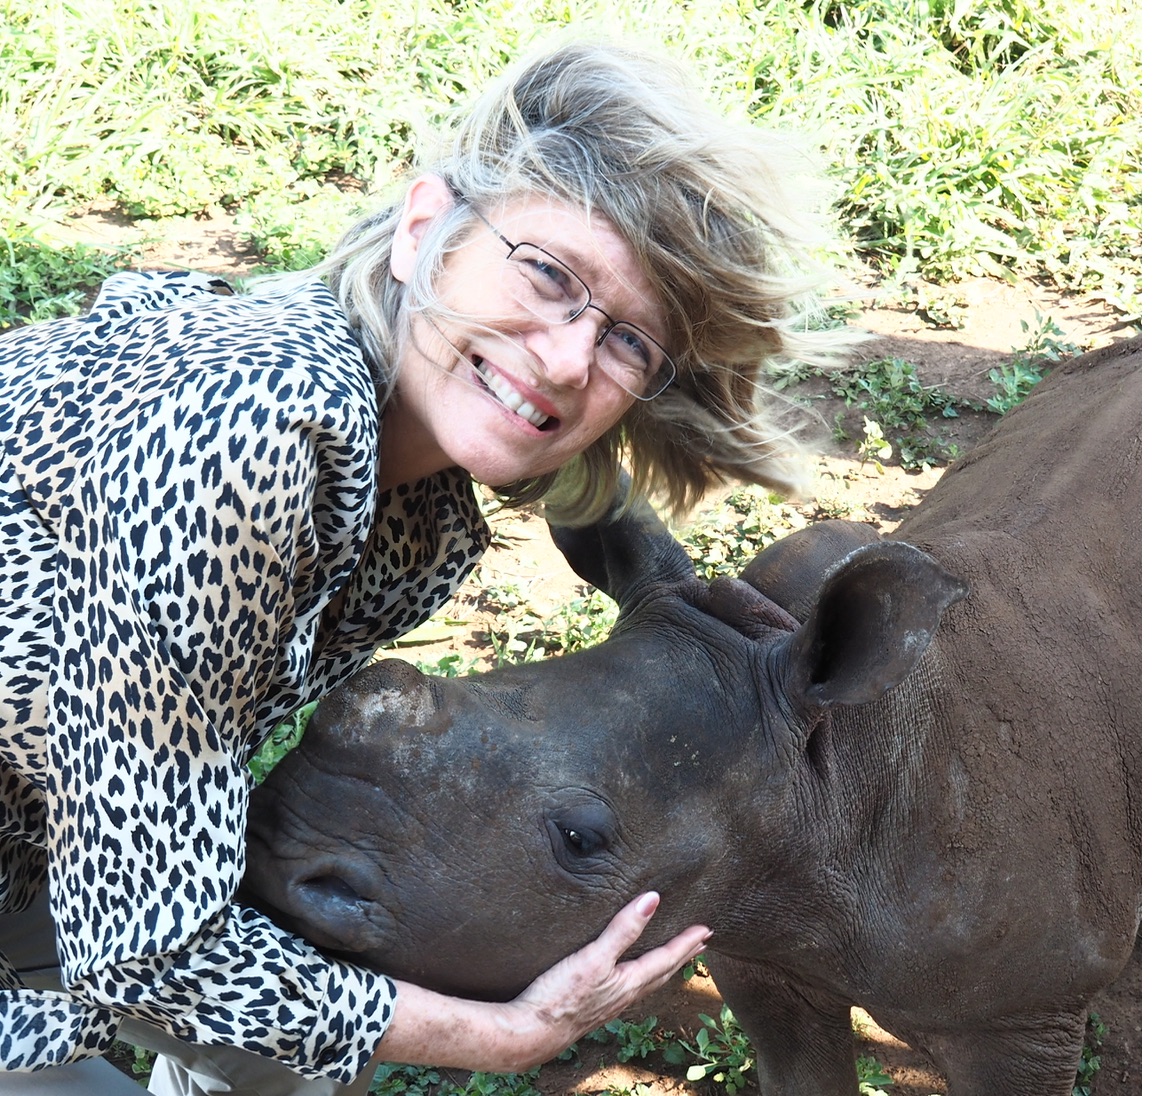 Barb with baby rhino up close